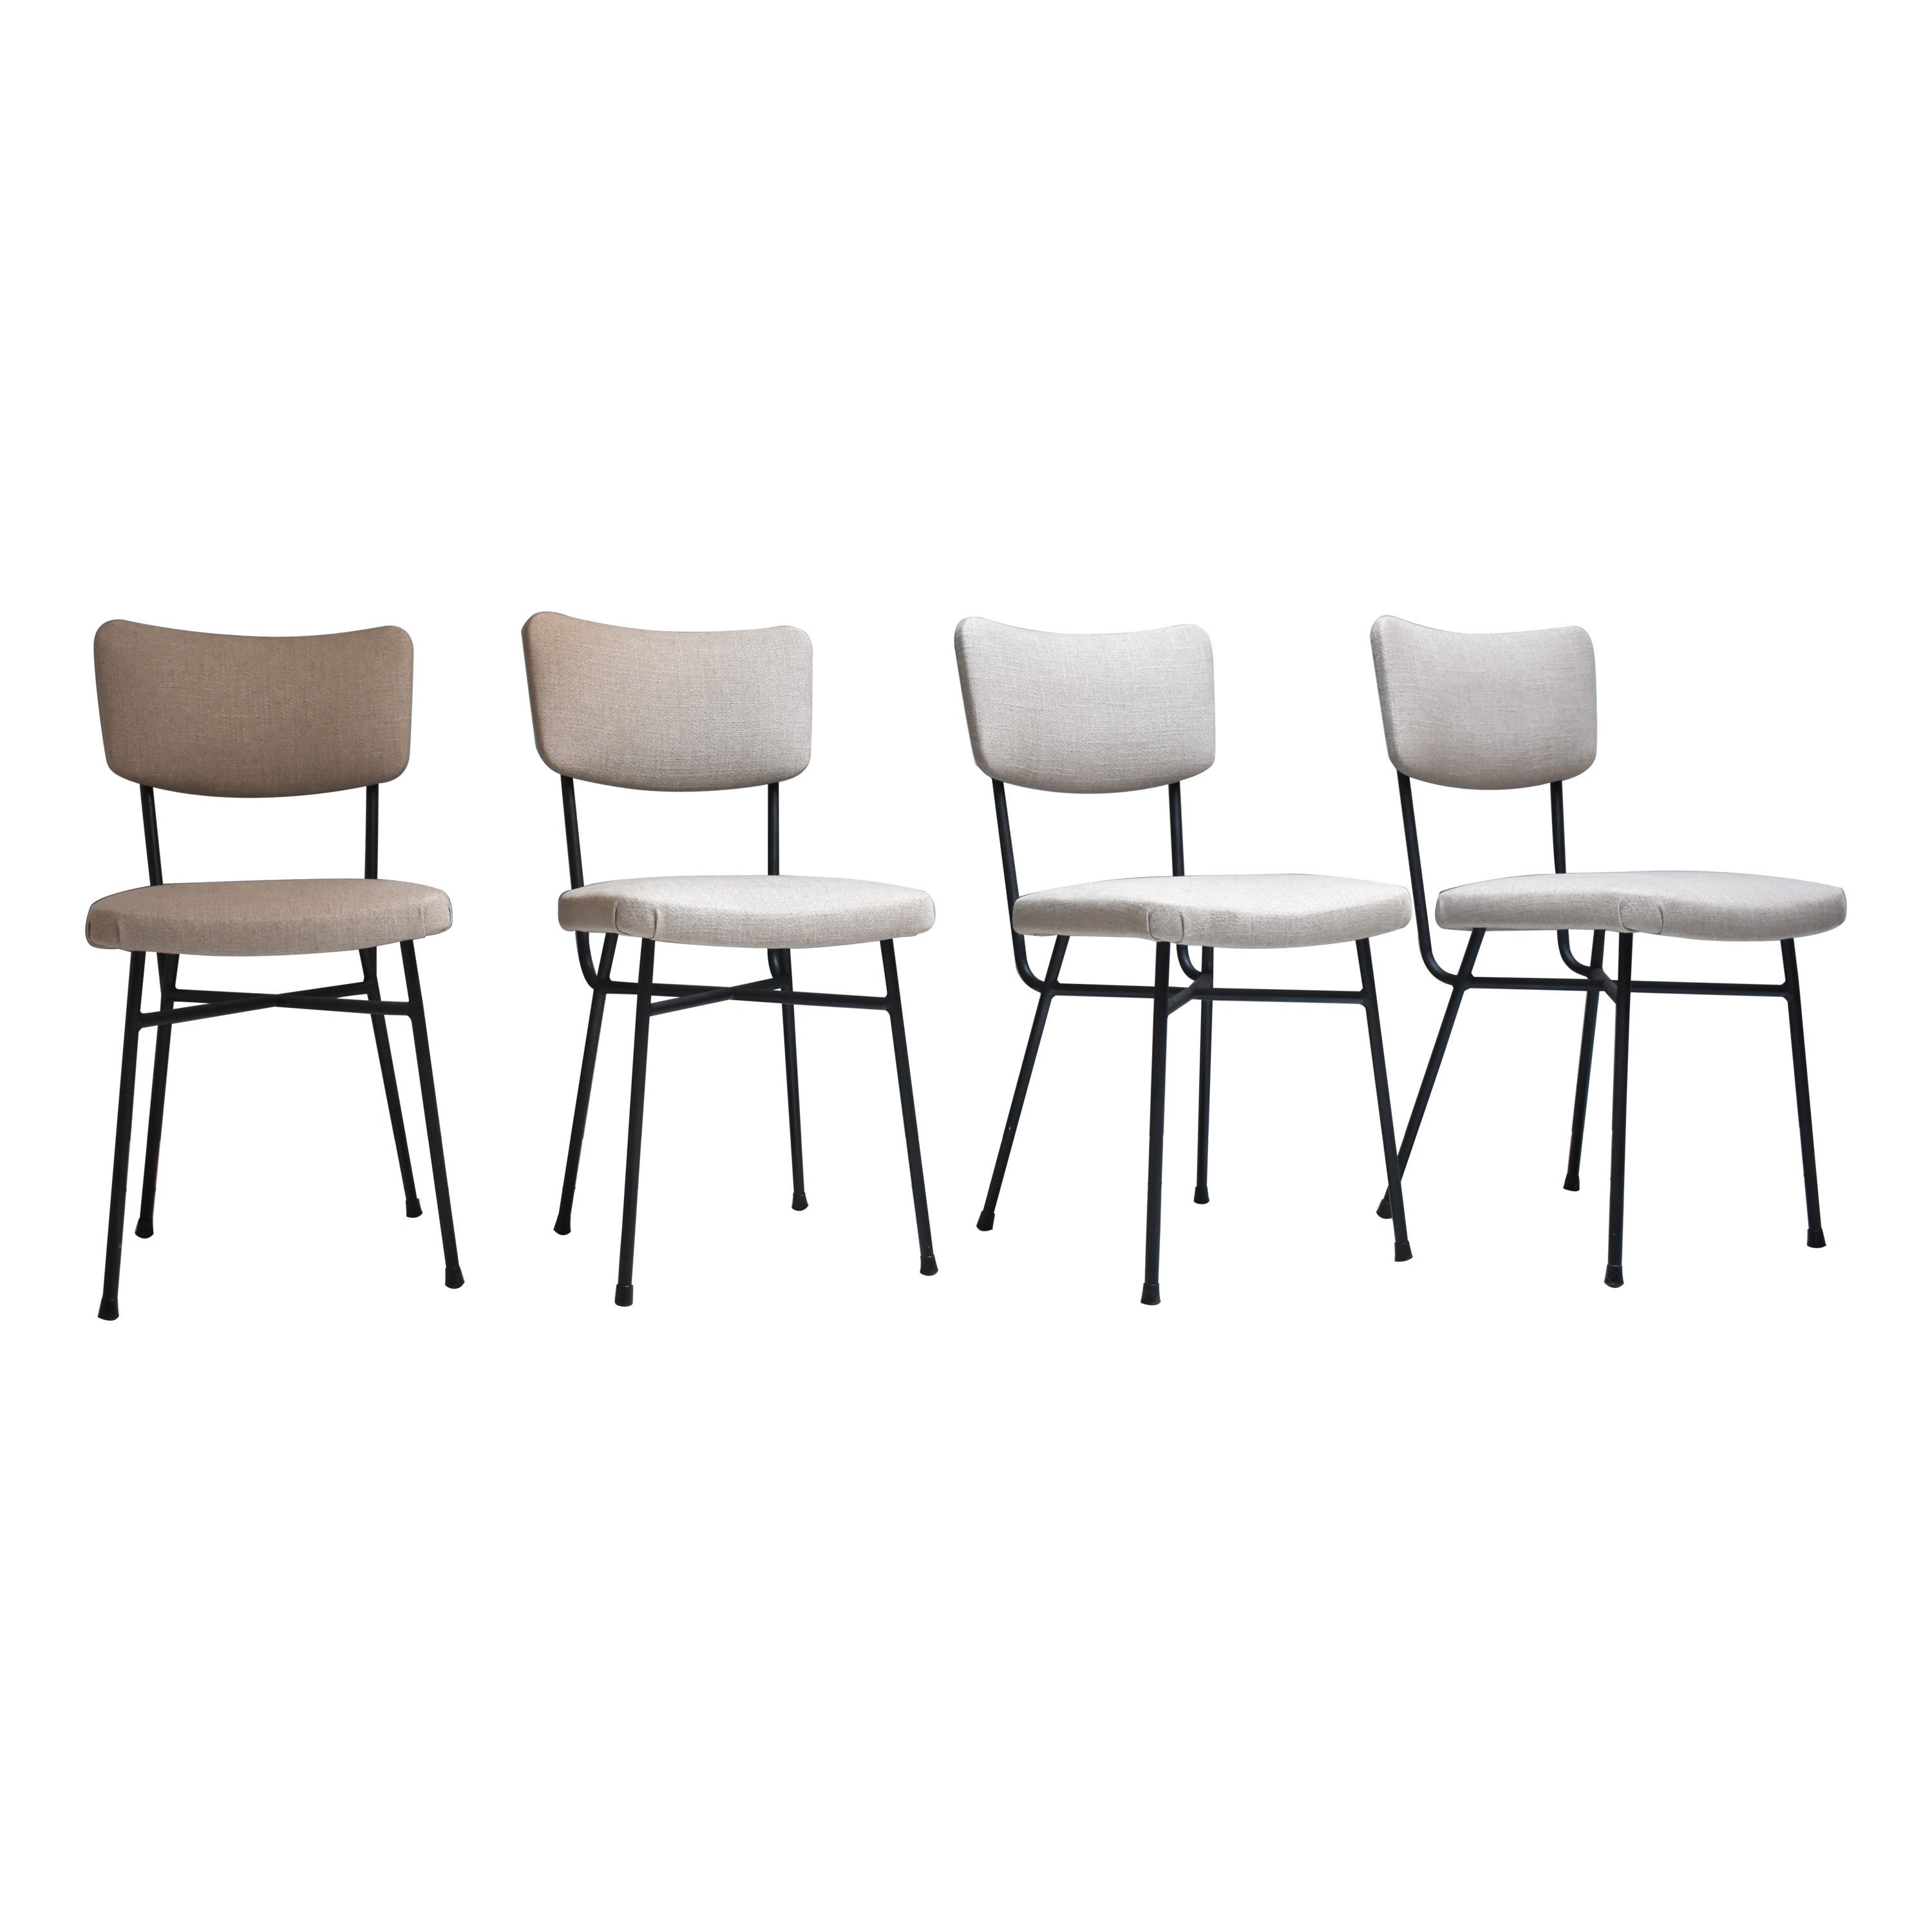  1960s, Set of 4 Vinatge Chairs Italian Manufacture in Black Iron and Light Grey